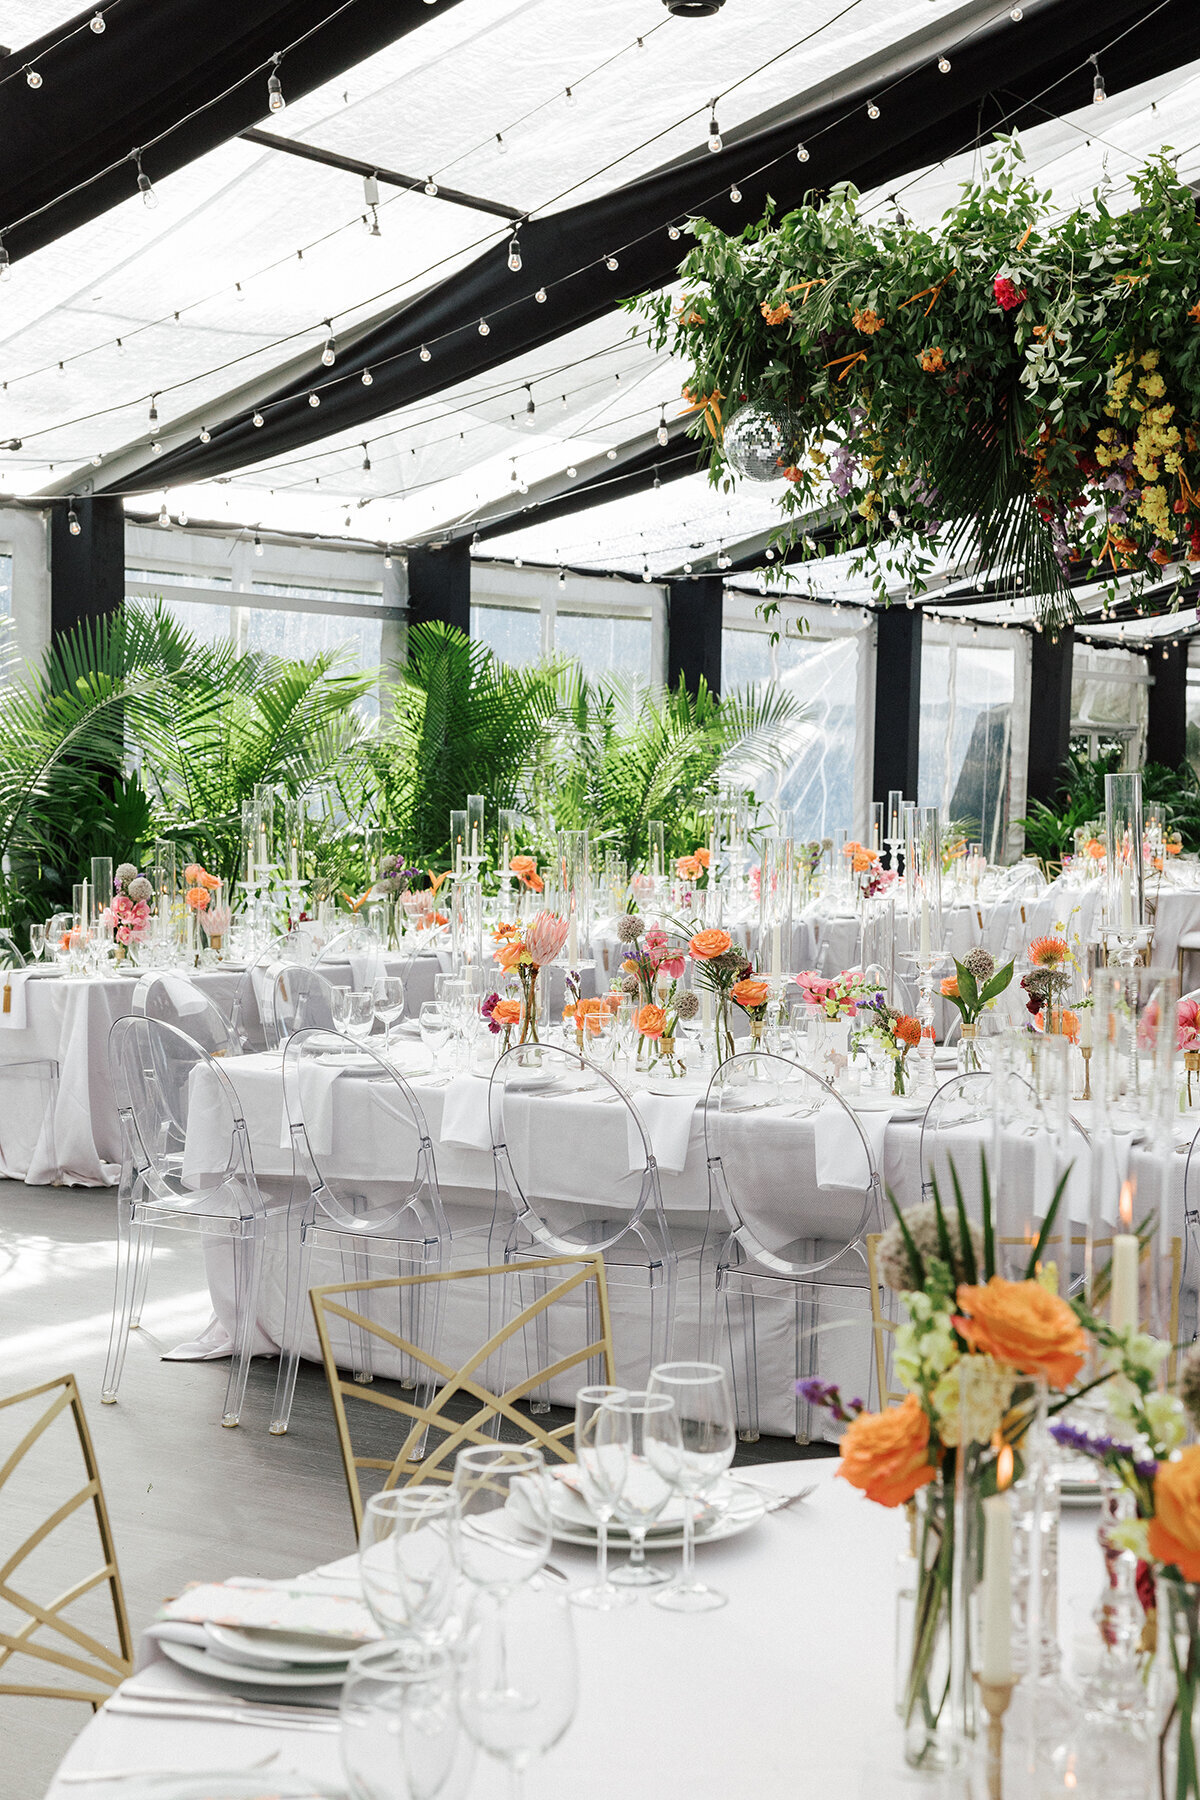 Sumner + Scott - New Orleans Museum of Art Wedding - Luxury Event Planning by Michelle Norwood - 37